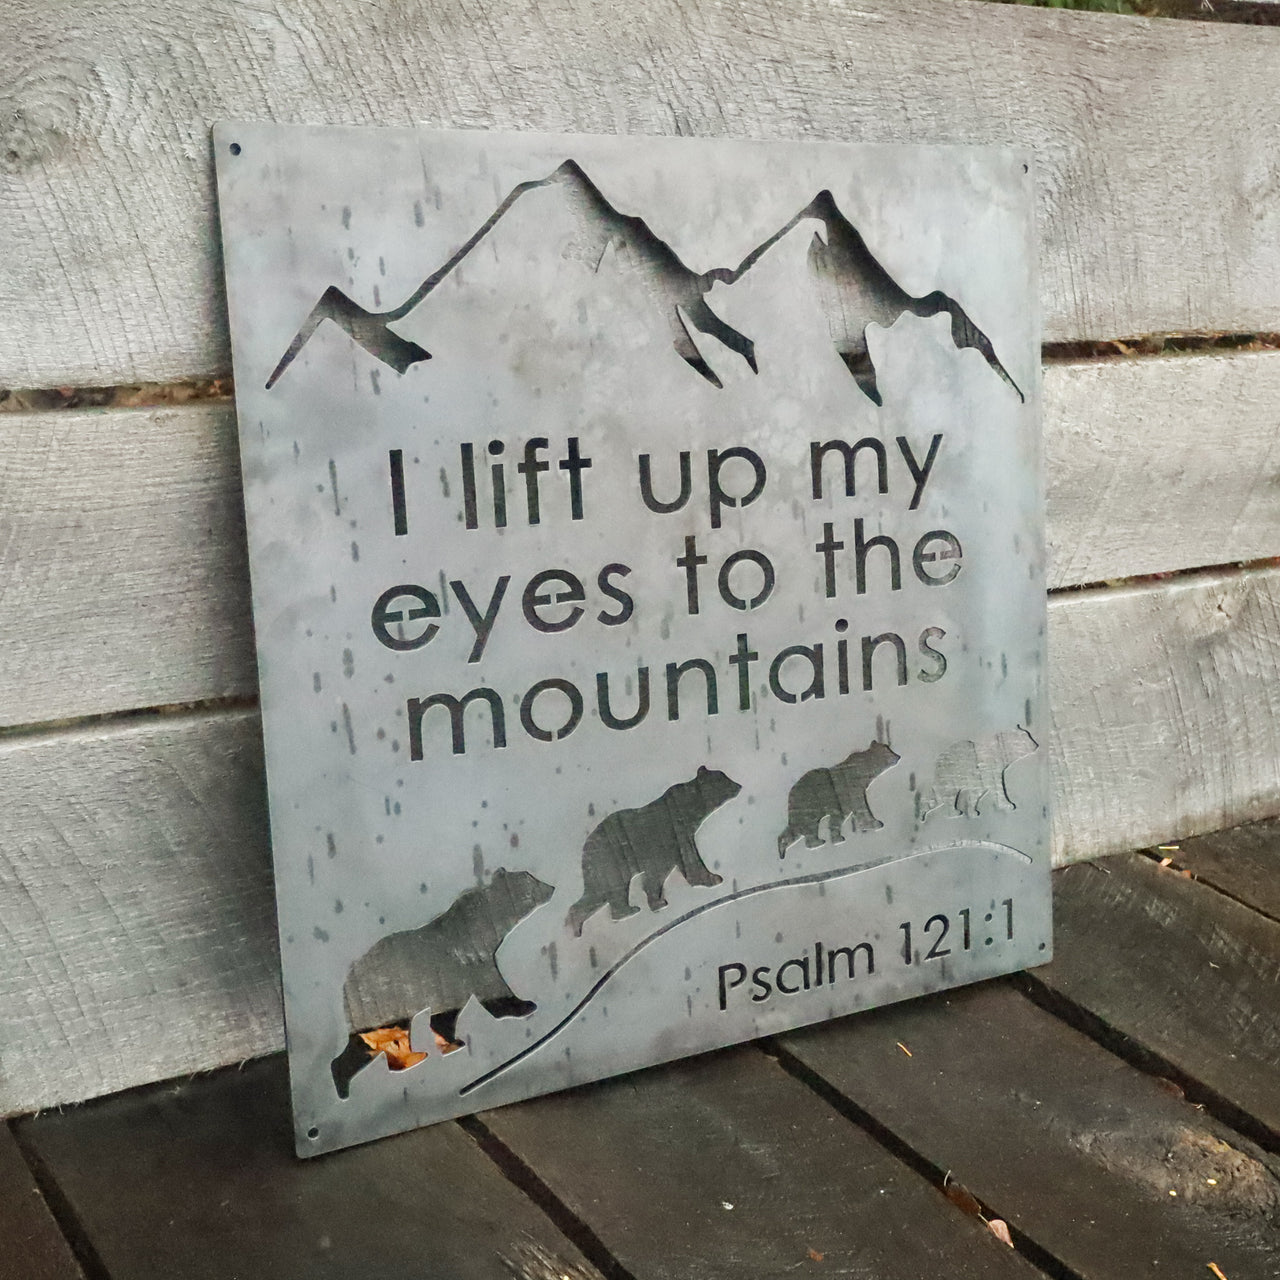 I lift up my Eyes to the Mountains and Bears Metal Sign - Inspirational Bible Quote Wall Art - Rustic Religious Home Decor